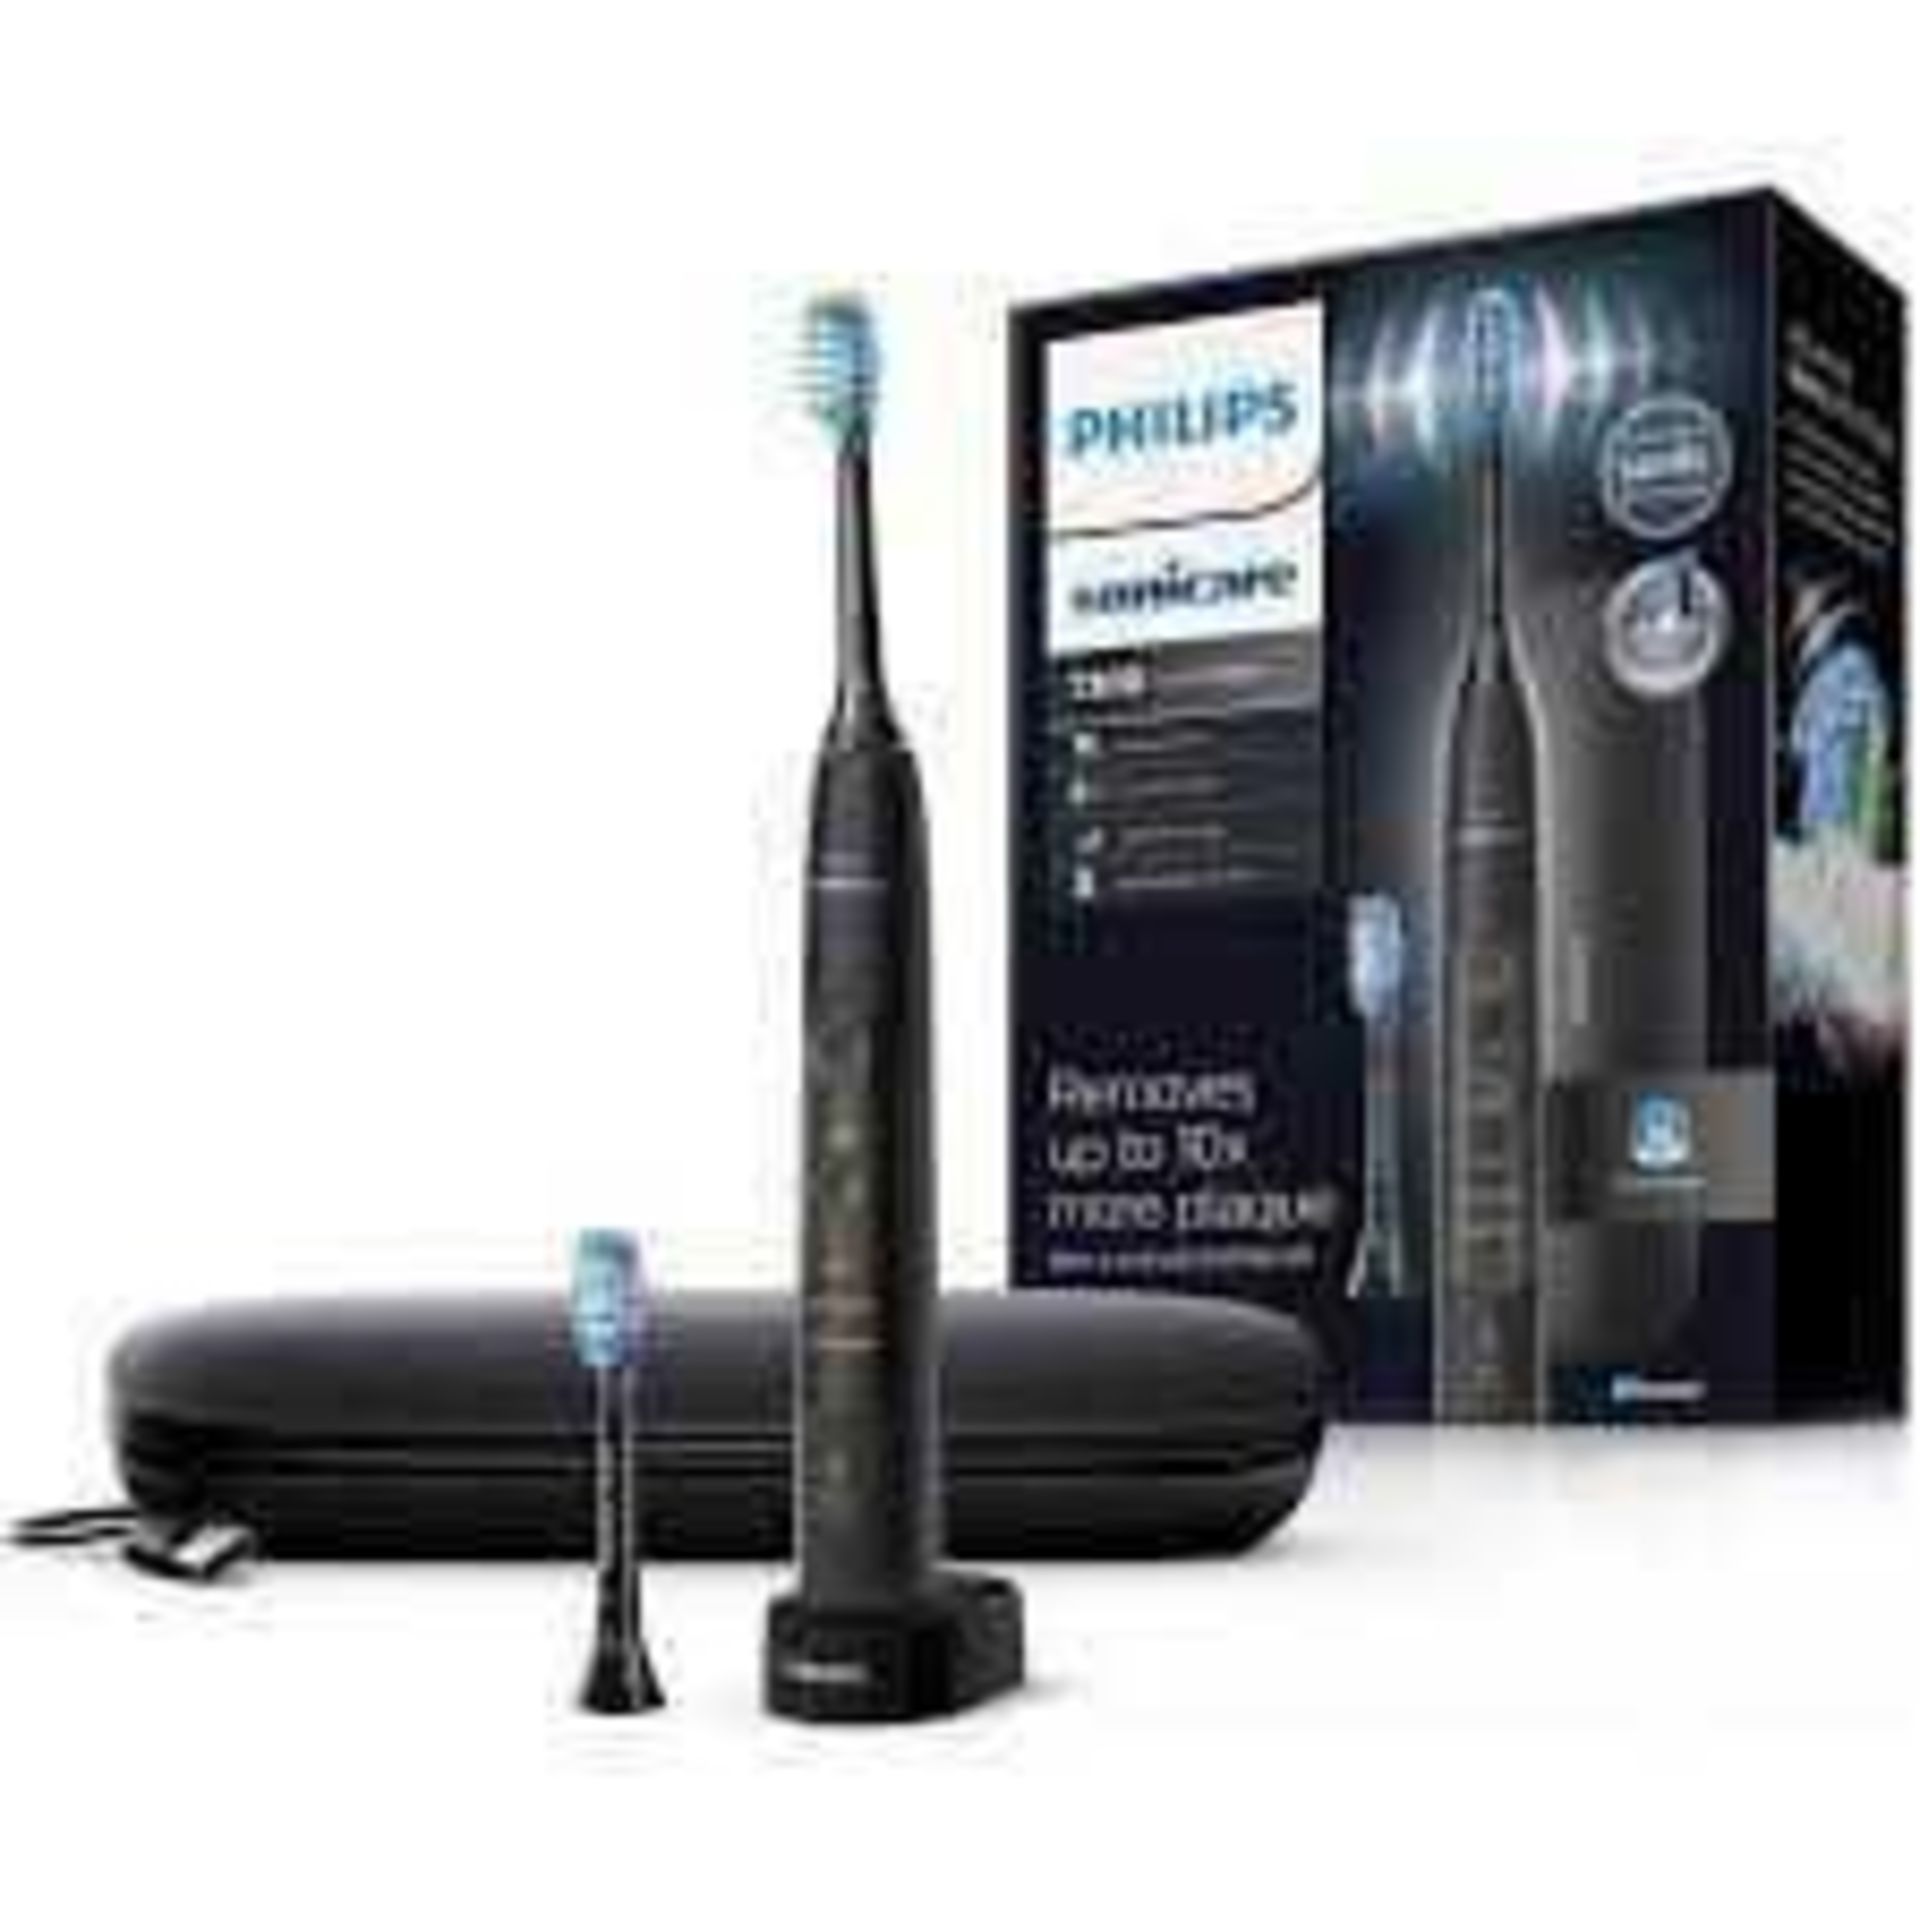 RRP £160 Boxed Philips Sonicare Hx9611/22 7300 Expertclean Electric Toothbrush, Black(Sp)